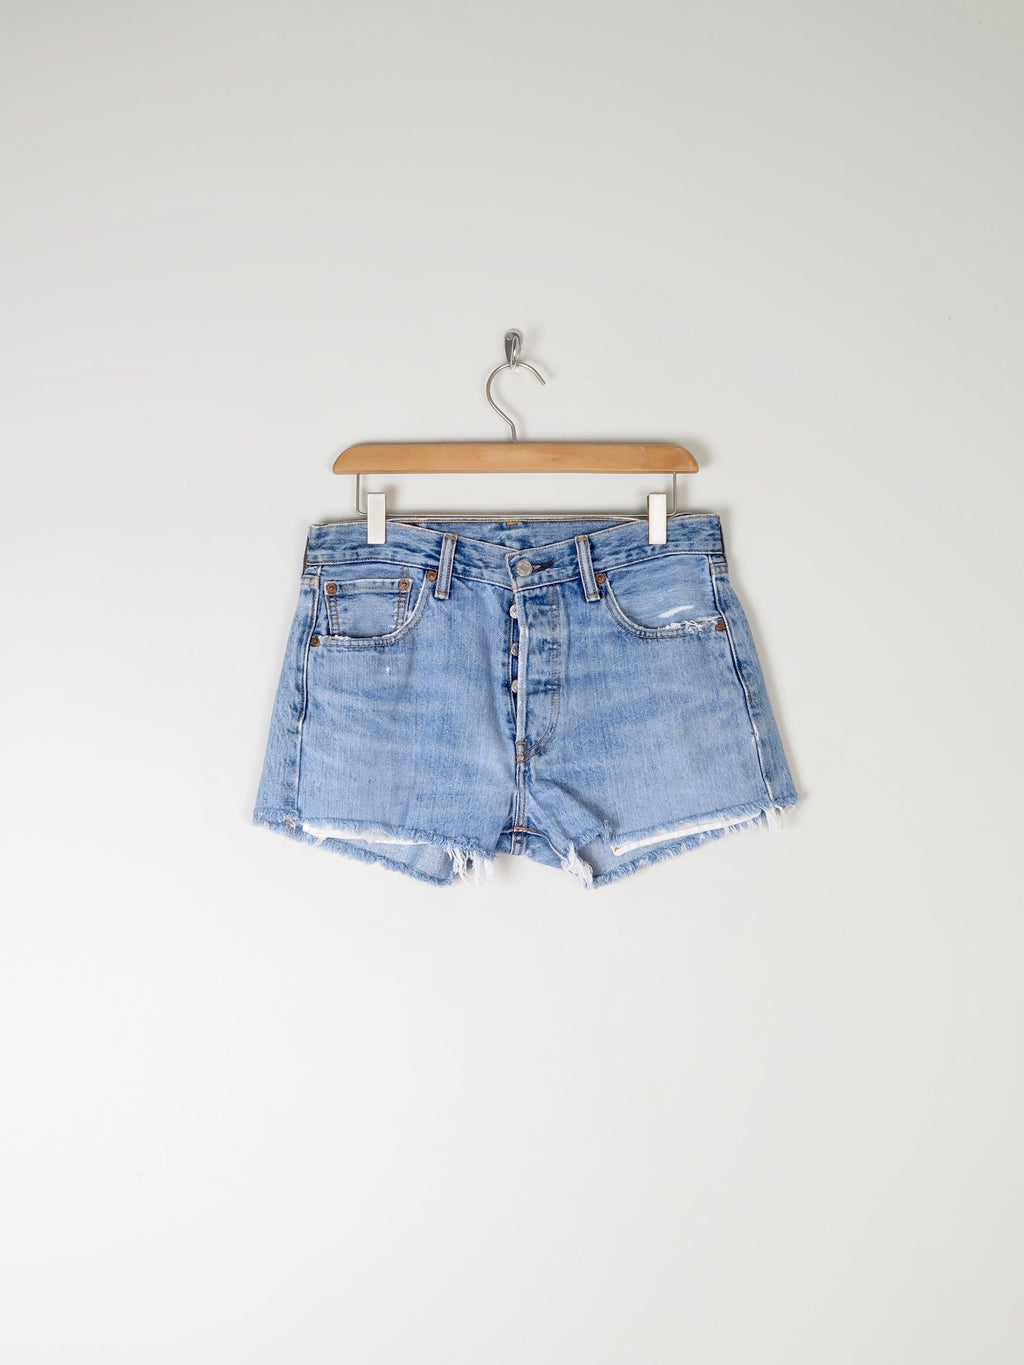 Levis Denim Shorts 31" 10/12 (Small Size 12) - The Harlequin